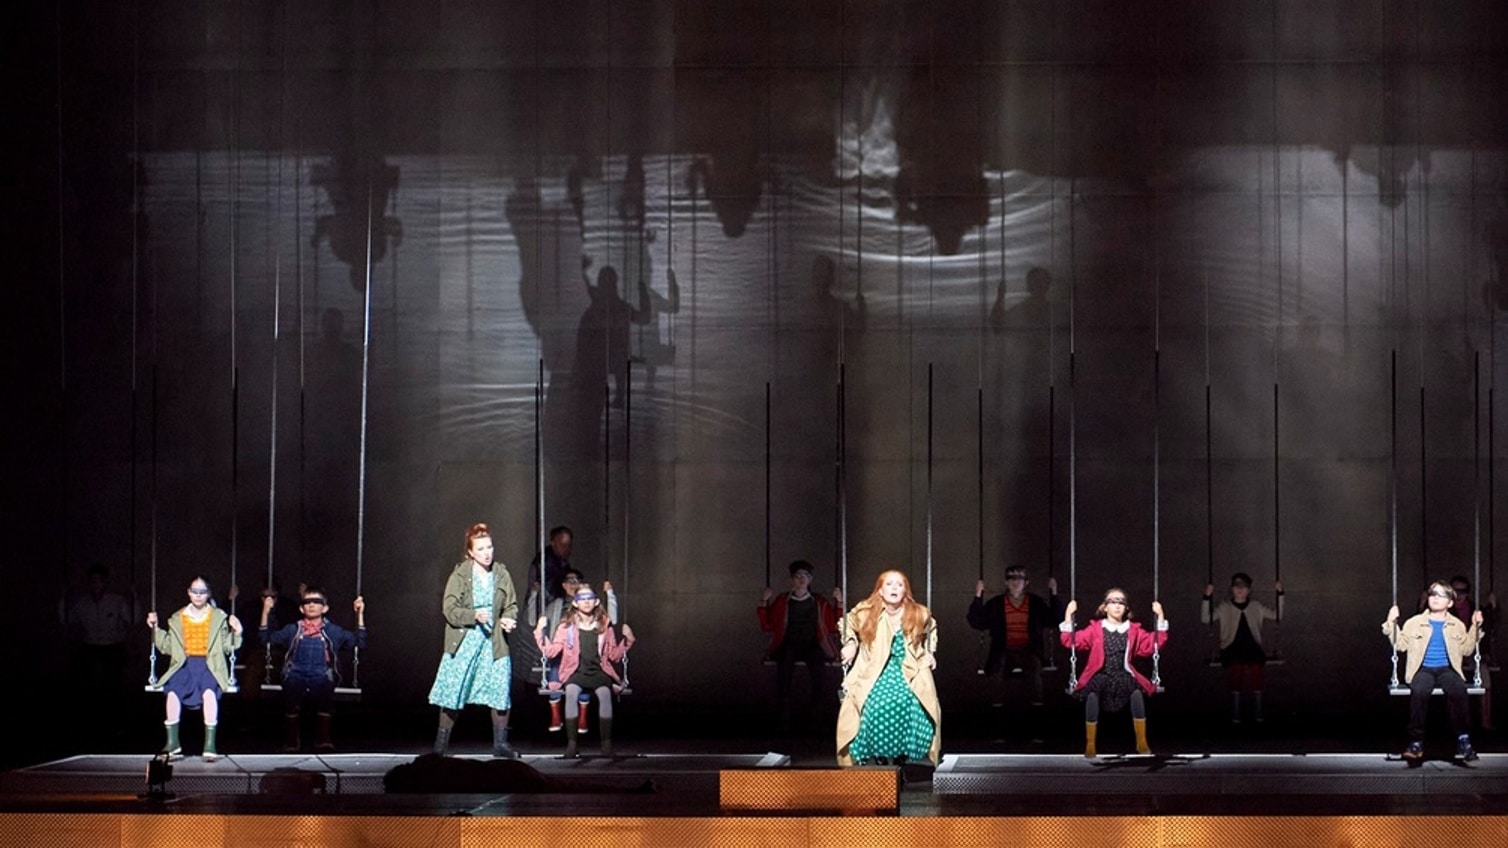 ‘Worst booing for years’ at Vienna’s new Tristan